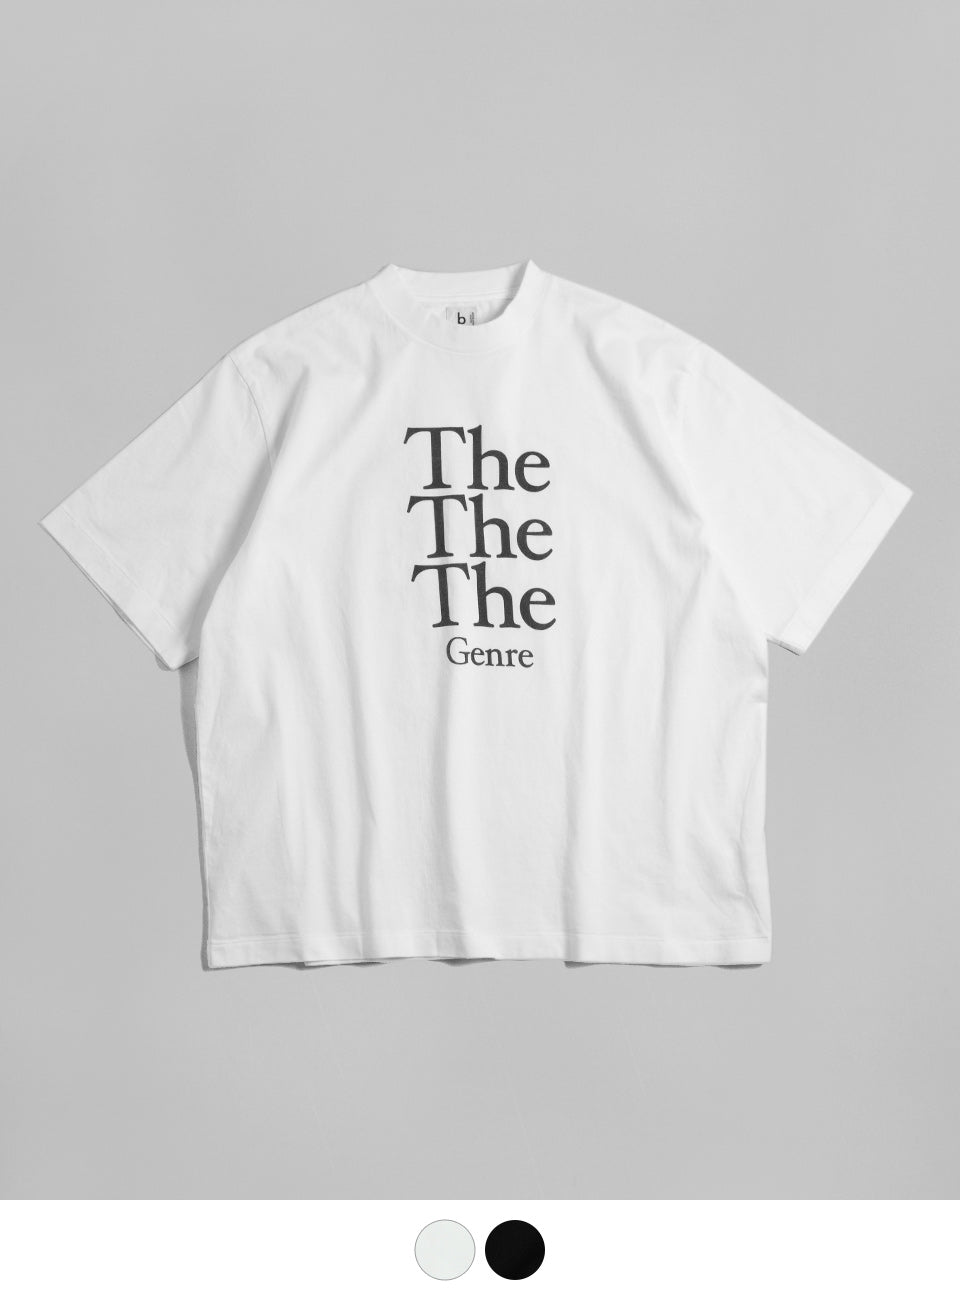 blurhms ROOTSTOCK ブラームス ルーツストックプリント Tシャツ ワイド The Genre The Print Tee WIDE 【送料無料】正規取扱店 [★]